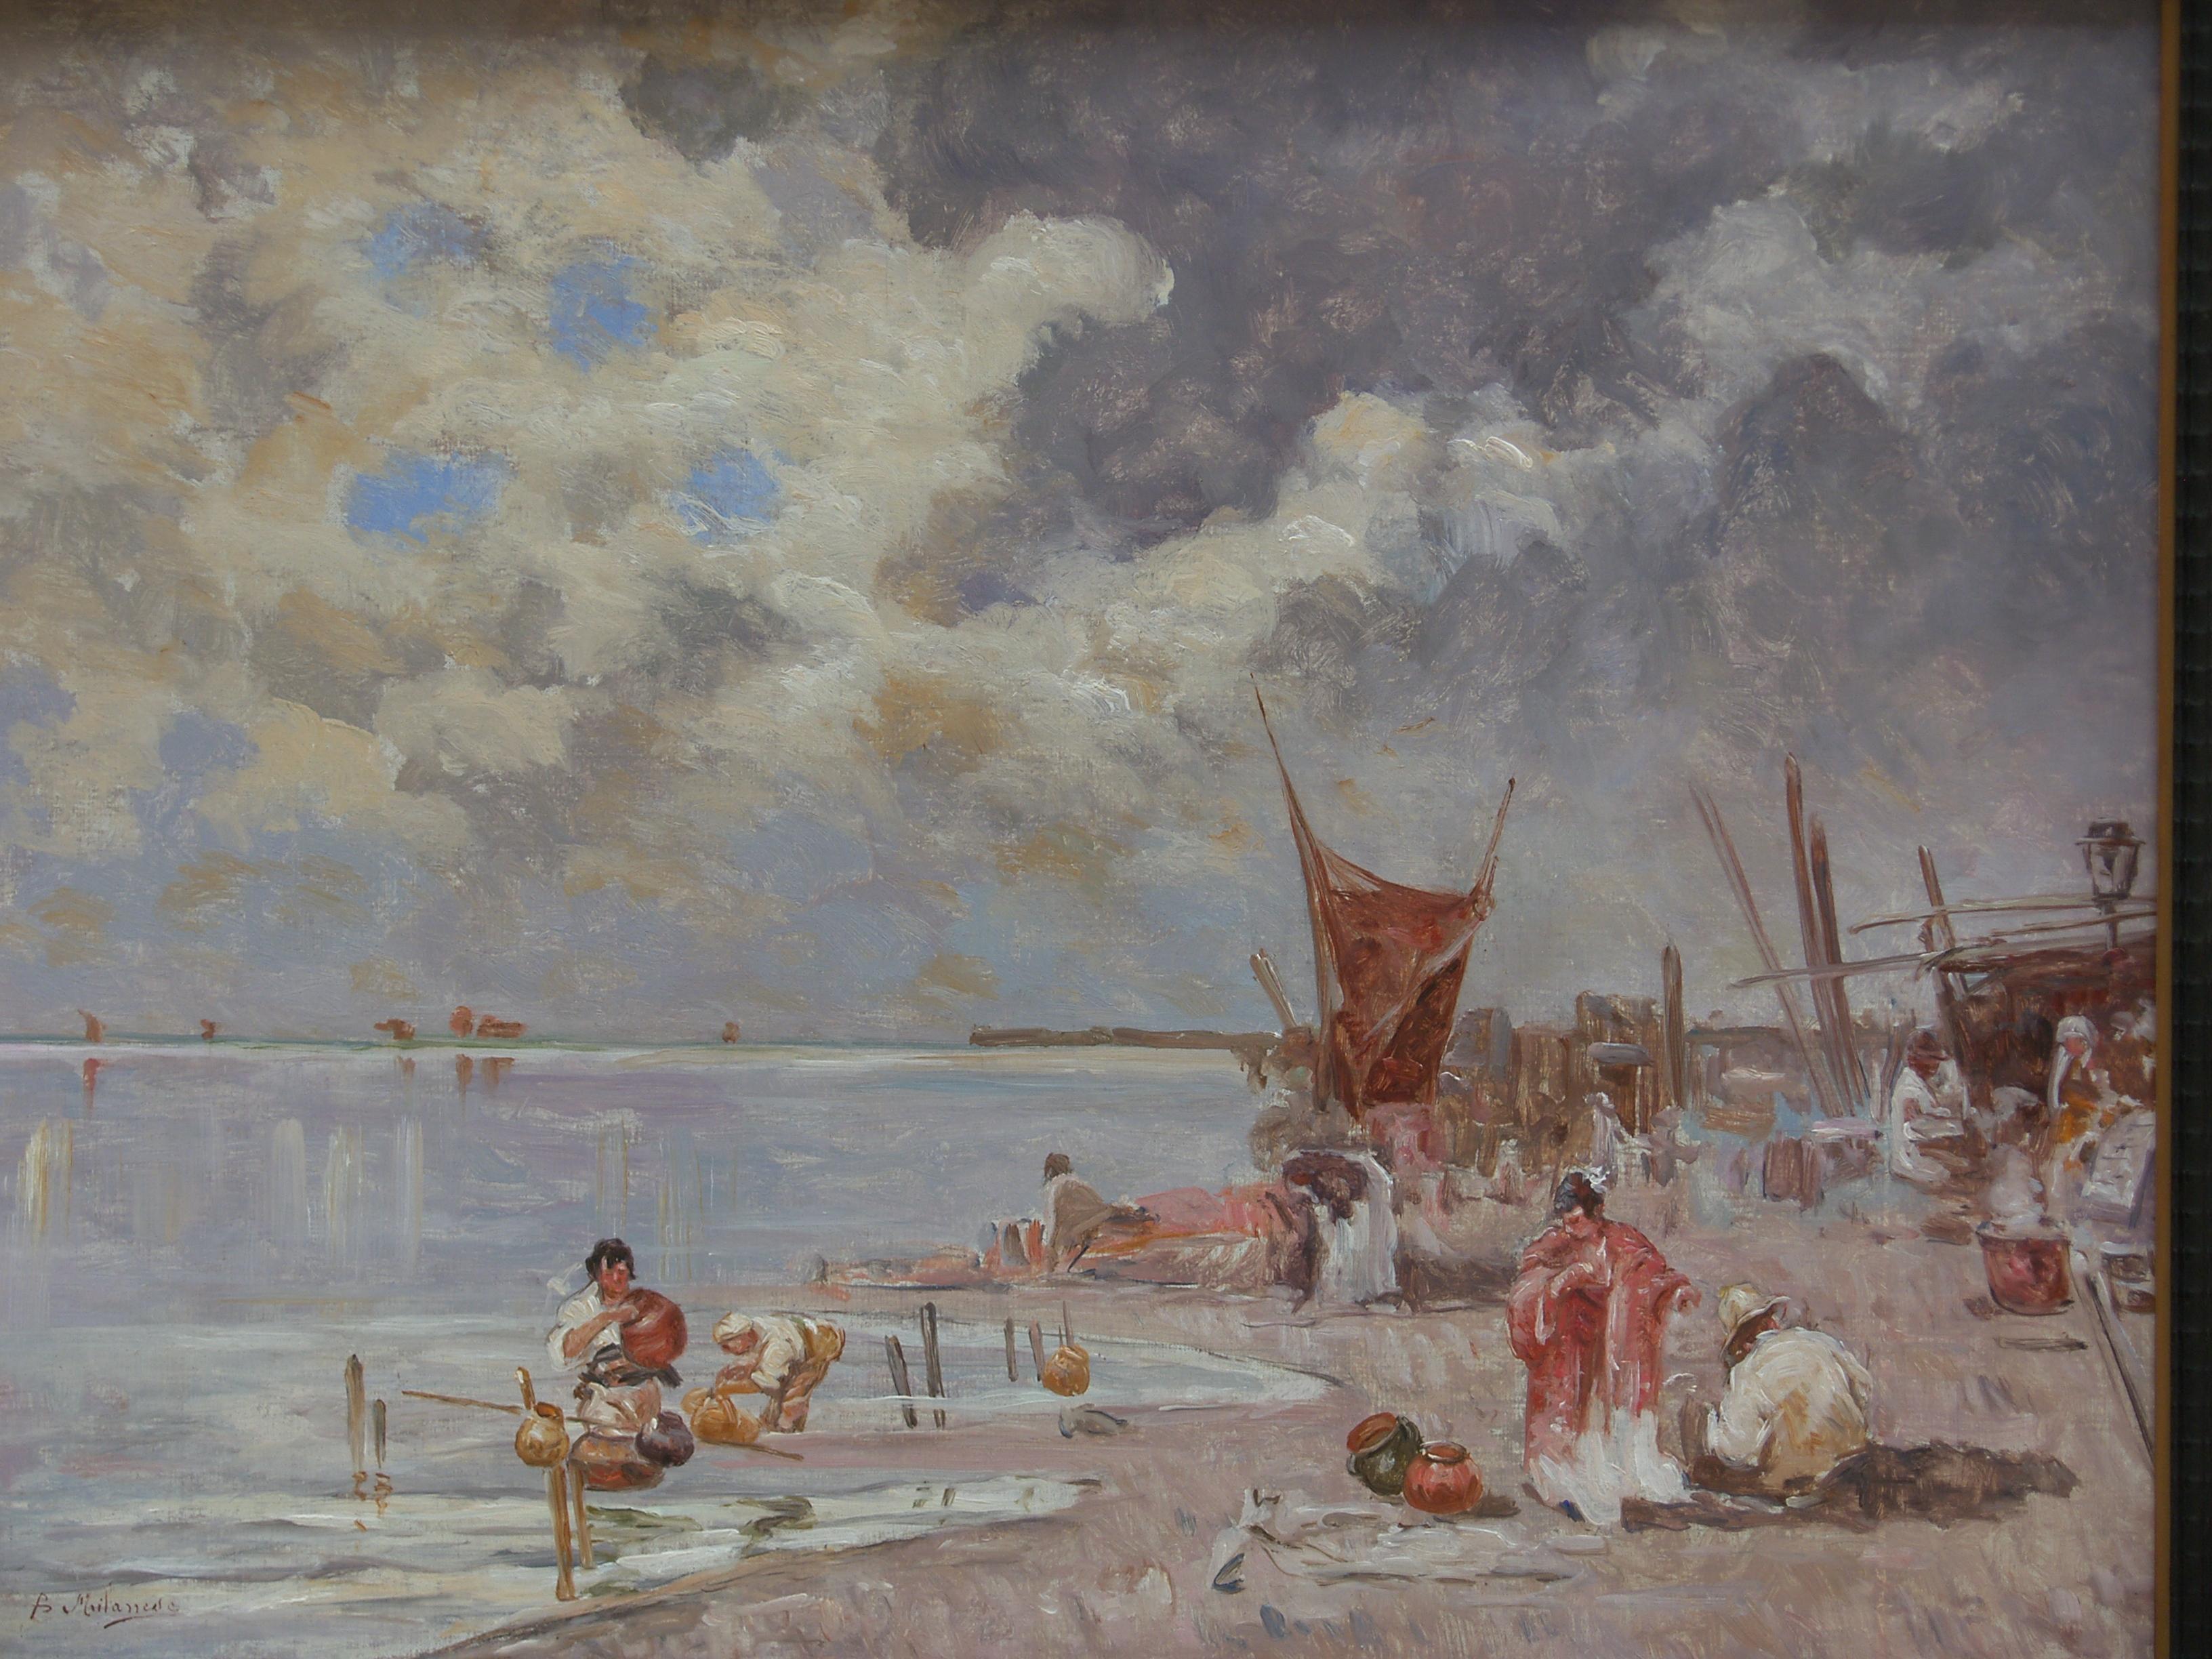 20th century, Italian oil on canvas painting with Venetian Lagoon, signed Biagio MILANESE (1886-1968) 
Sizes: H 70 x W 90 cm with frame; H 50 x W 70 cm only canvas

The painting, executed in oil on canvas, is signed at the bottom left by the